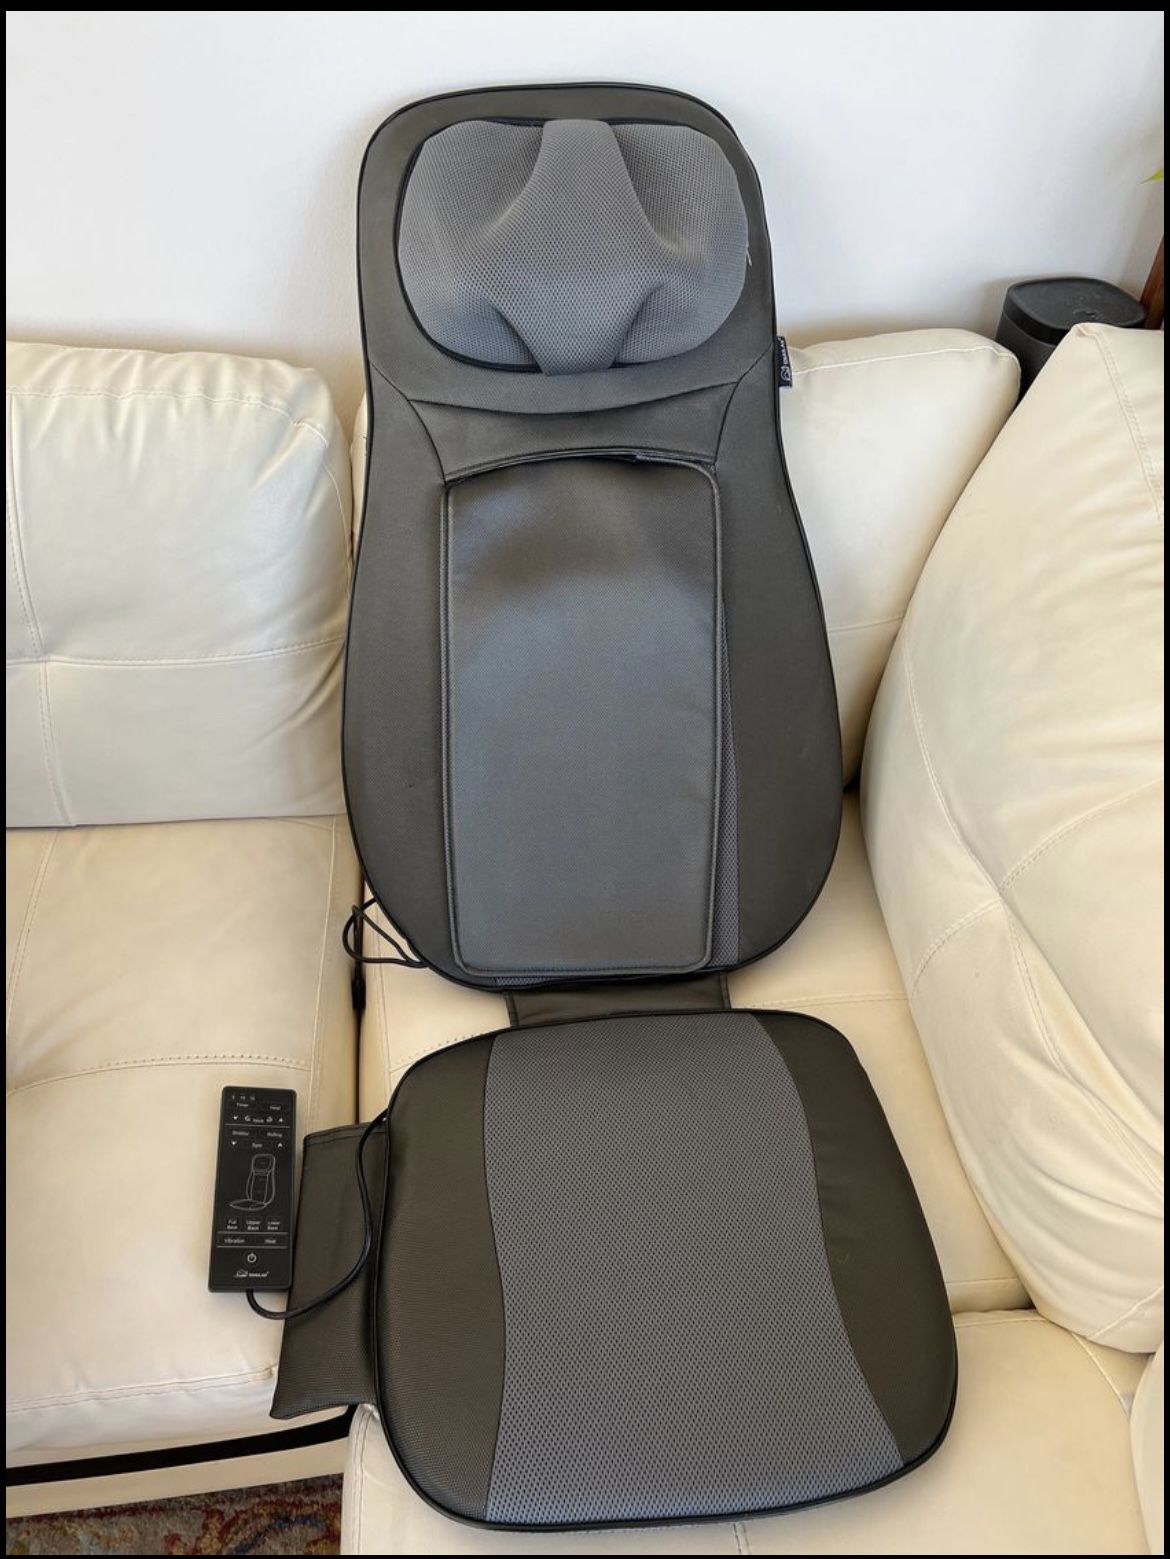 Snailax shiatsu Neck & Back Massager with Heat for Sale in Jersey City, NJ  - OfferUp